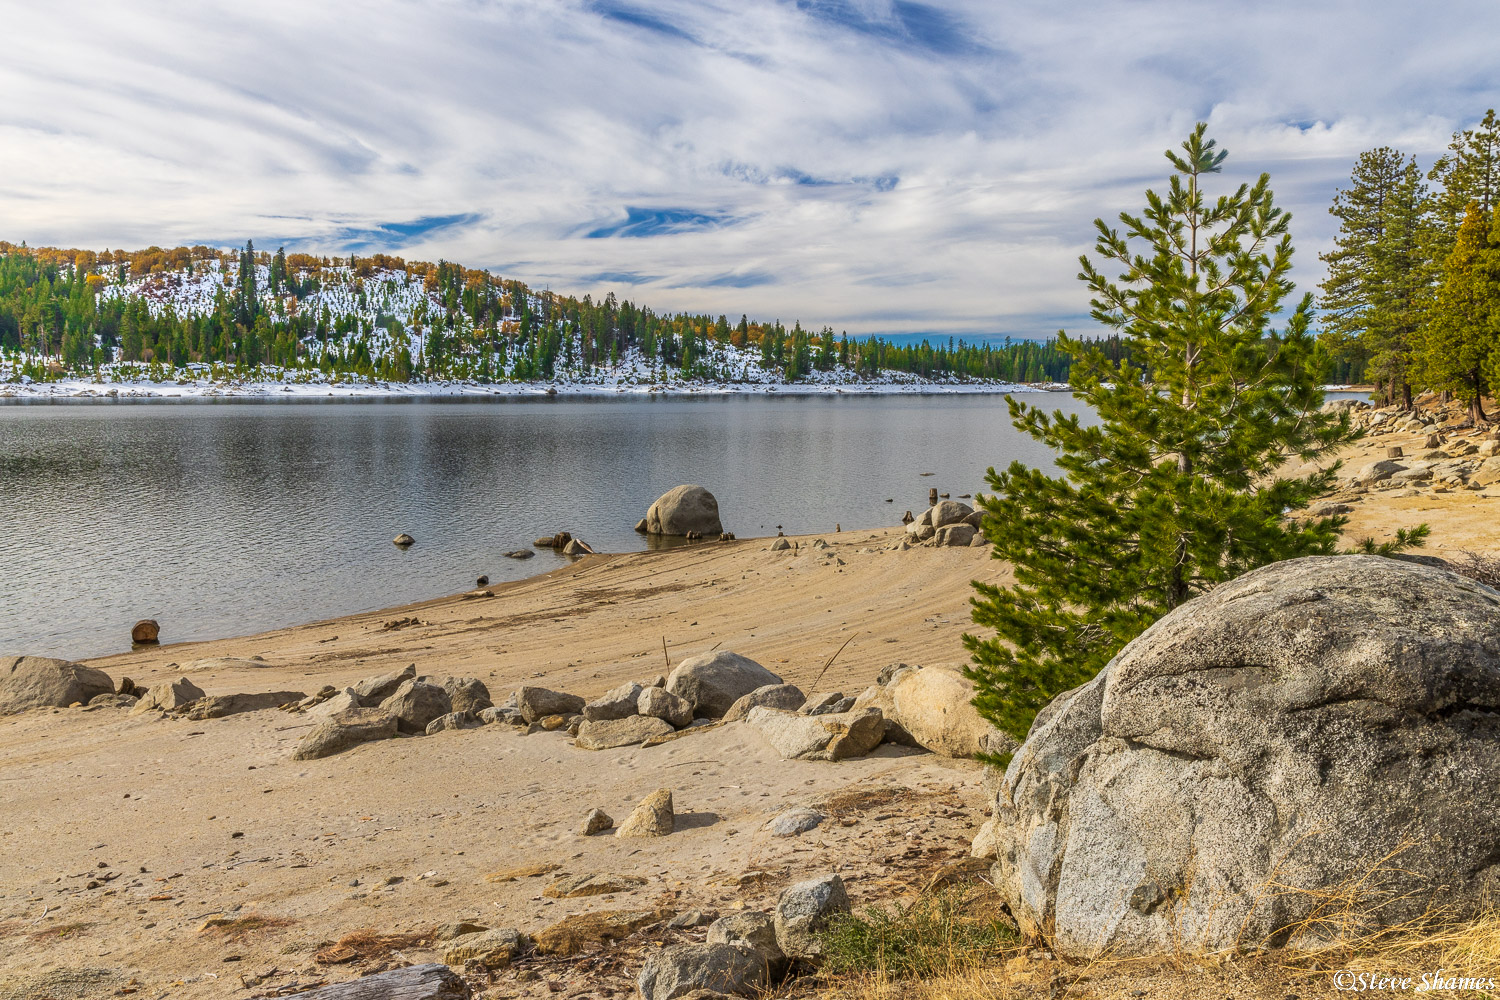 On the shore of a scenic Sierra lake.